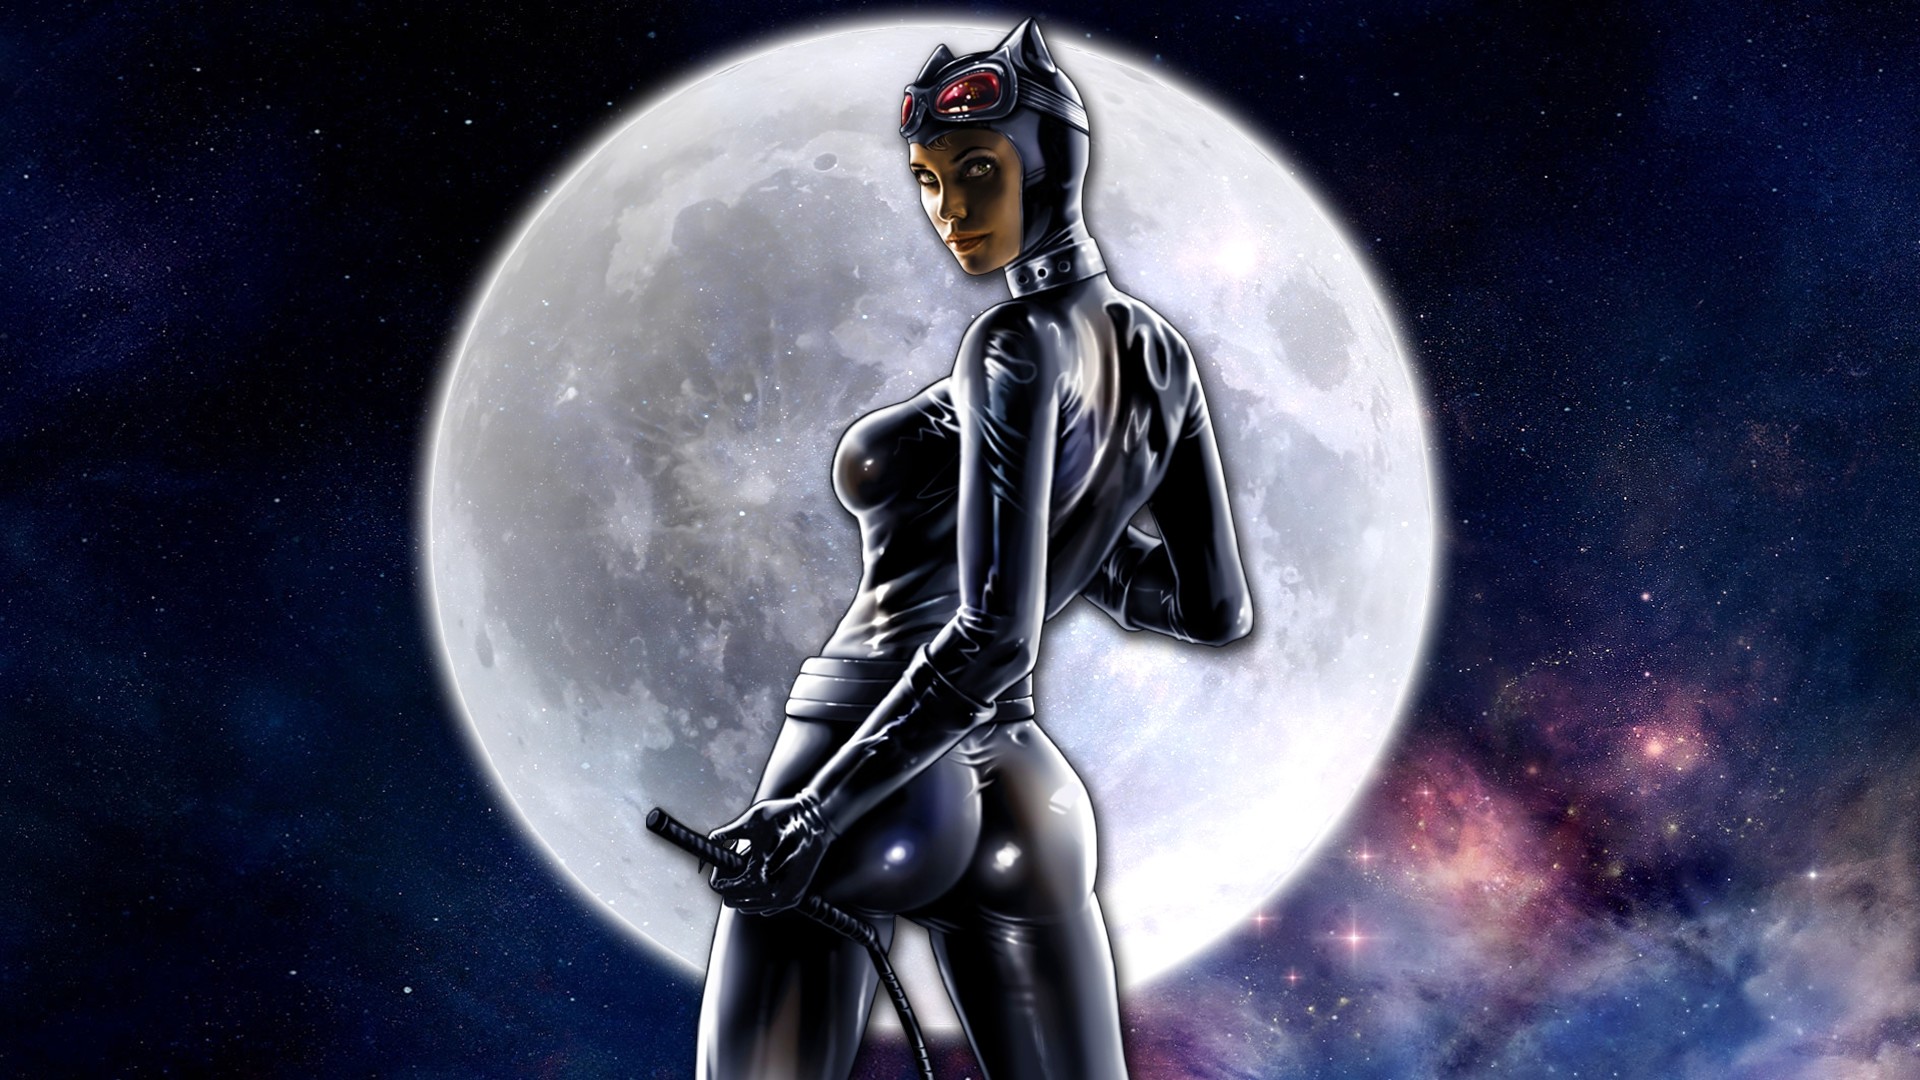 Catwoman high definition wallpapers Â· Catwoman photos